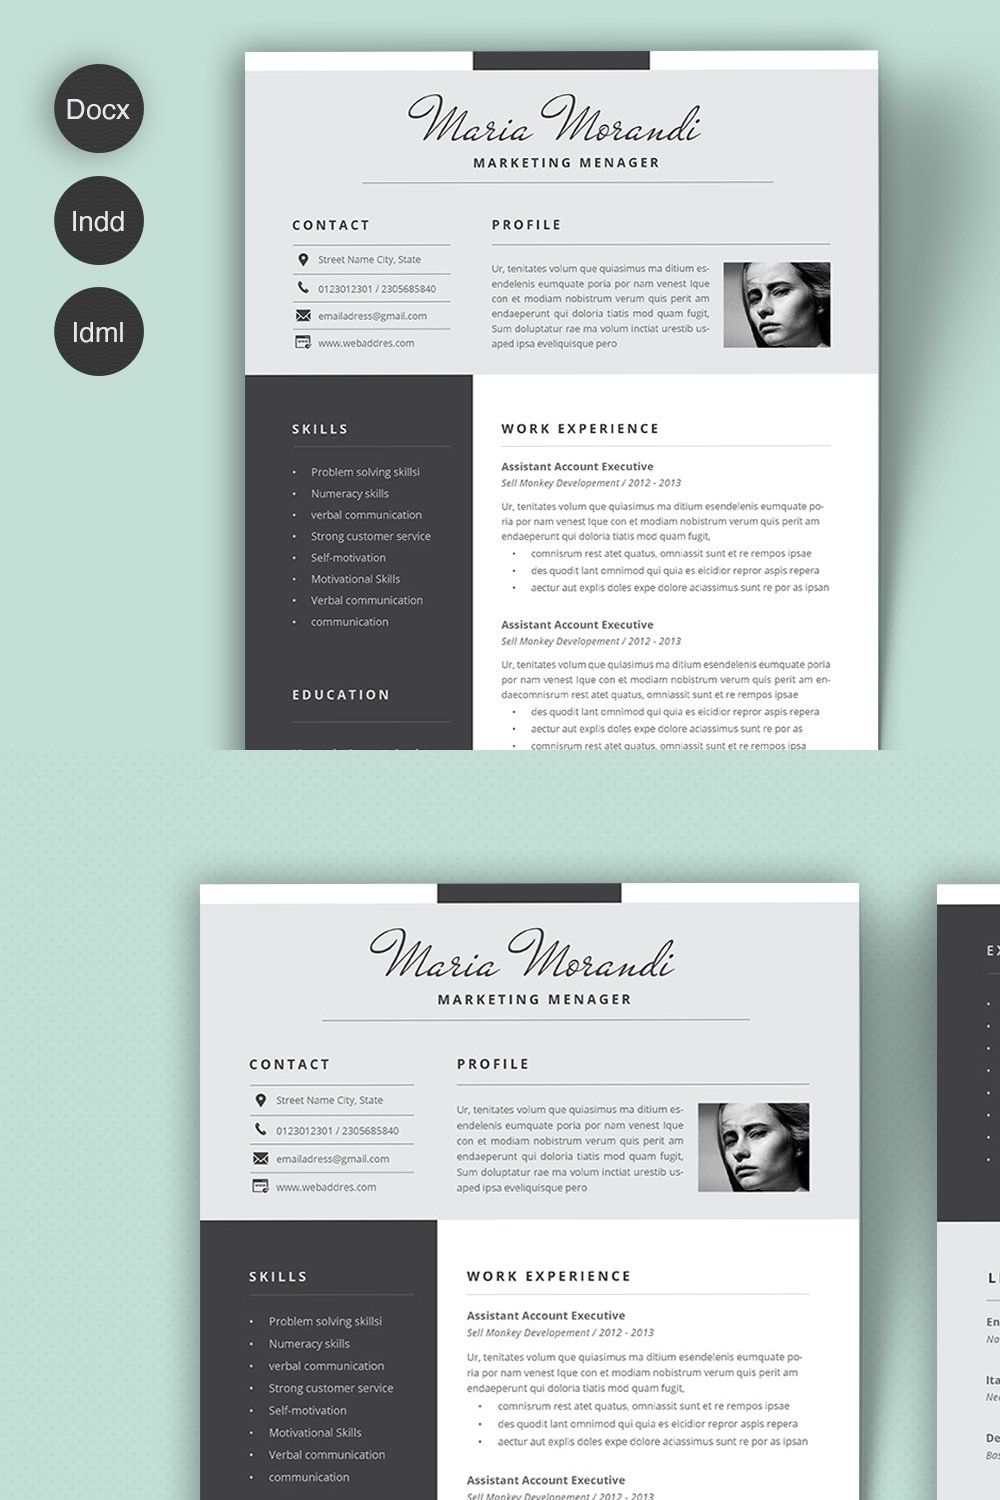 Resume Maria pinterest preview image.